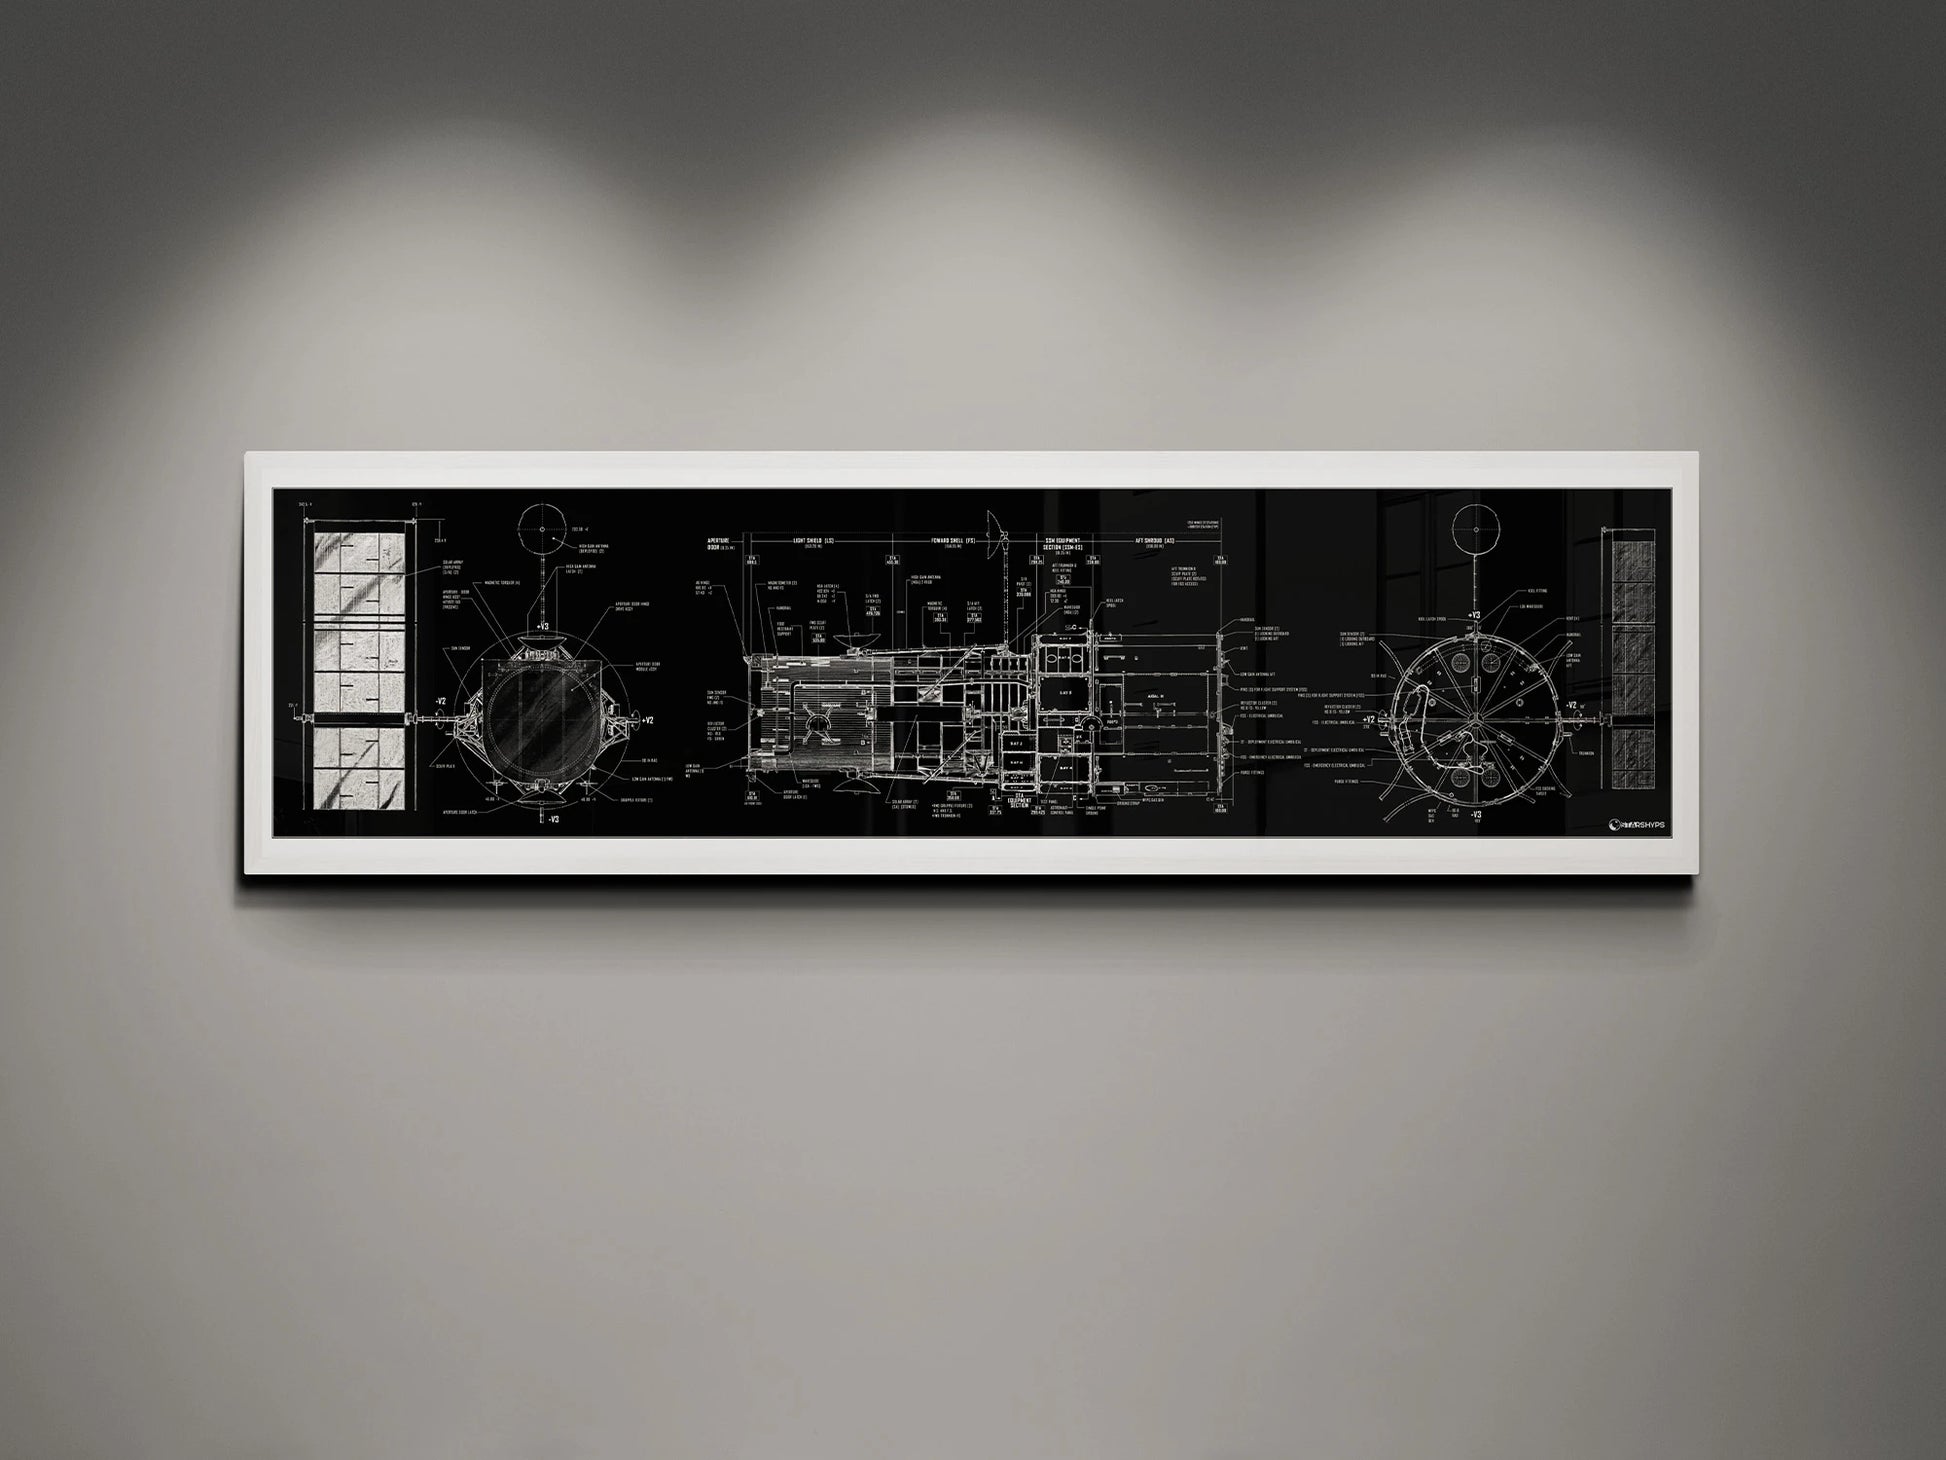 Hubble Space Telescope Blueprint | Rocket Blueprint Posters | A framed blueprint of the NASA Hubble Space Telescope, showcasing intricate technical drawings in white on a black background. The blueprint is mounted on a gray wall and highlighted by soft overhead lights.